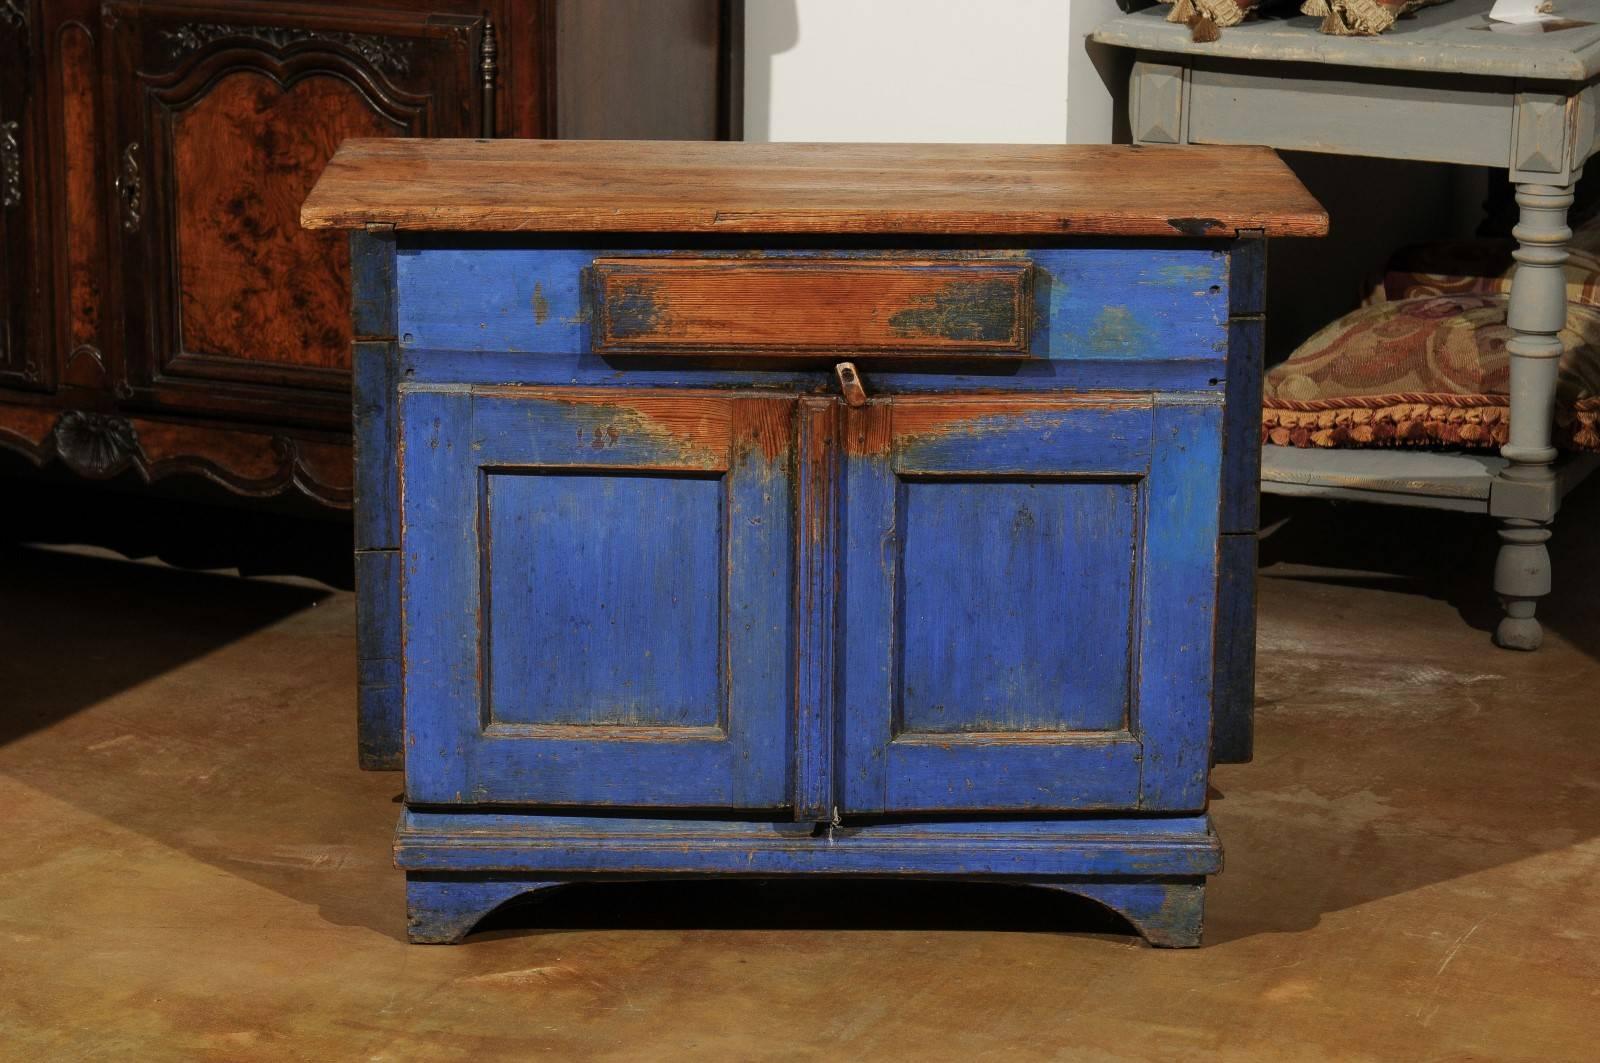 A Swedish blue painted buffet with attached drop-leaf table from the mid 19th century. This uncommon Swedish buffet features a two-plank rectangular top sitting above a single drawer and two doors painted in their original blue color. The nicely